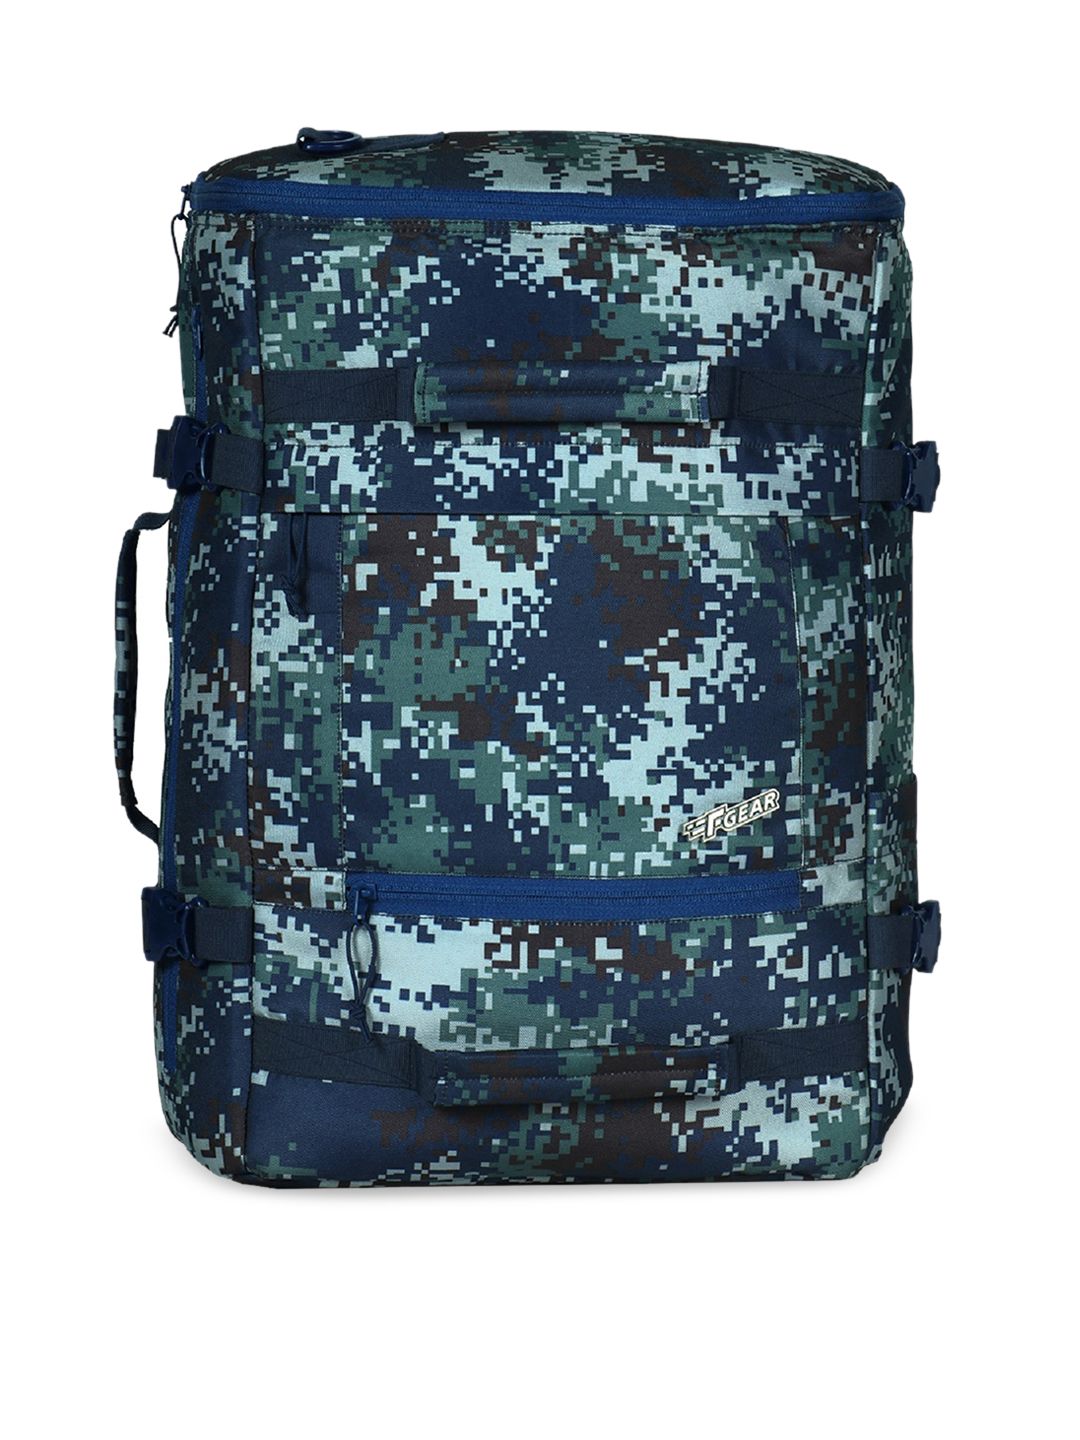 F Gear Unisex Blue & Brown Camouflage Backpack Price in India